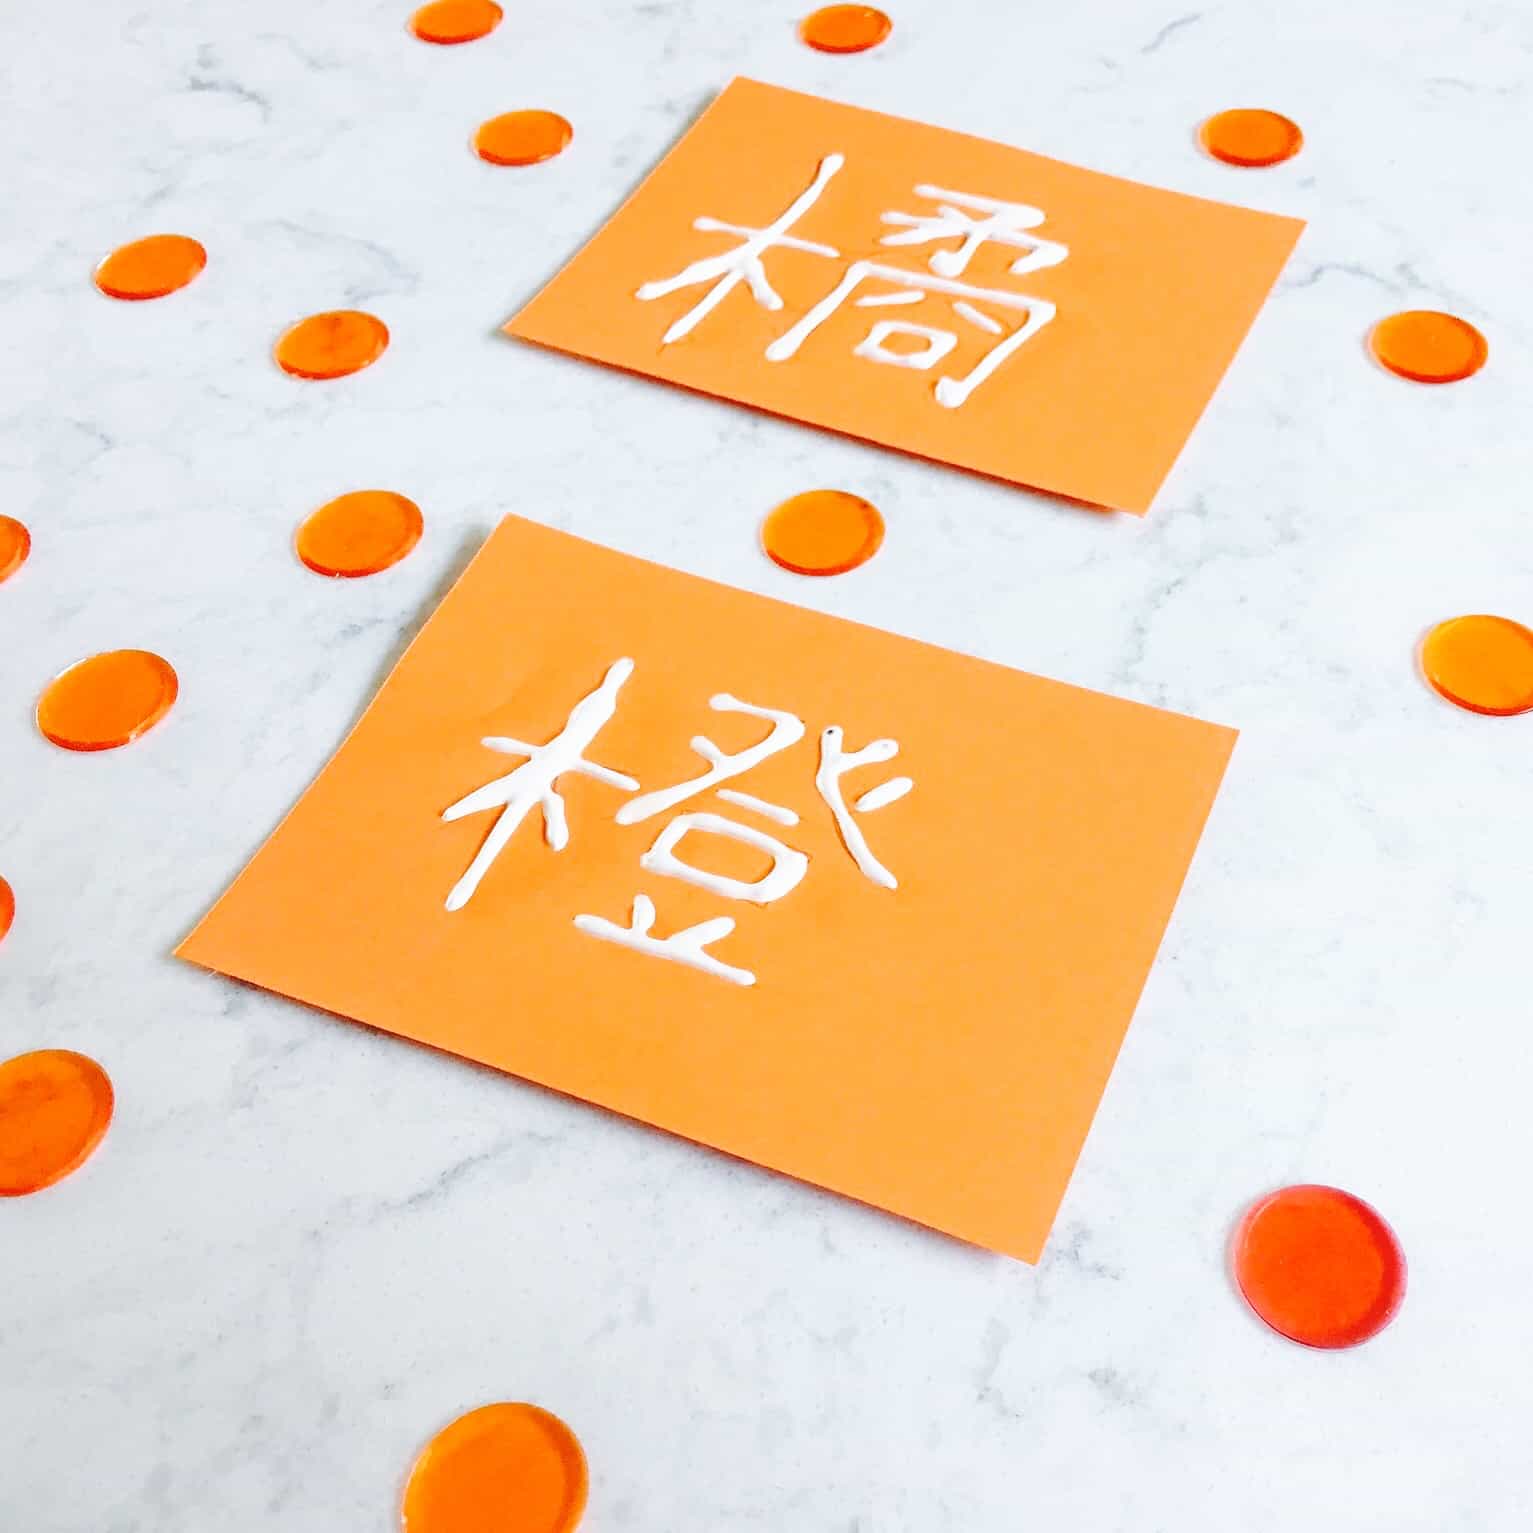 How to Use Puffy Paint to Make Tactile Chinese and Korean Letters!